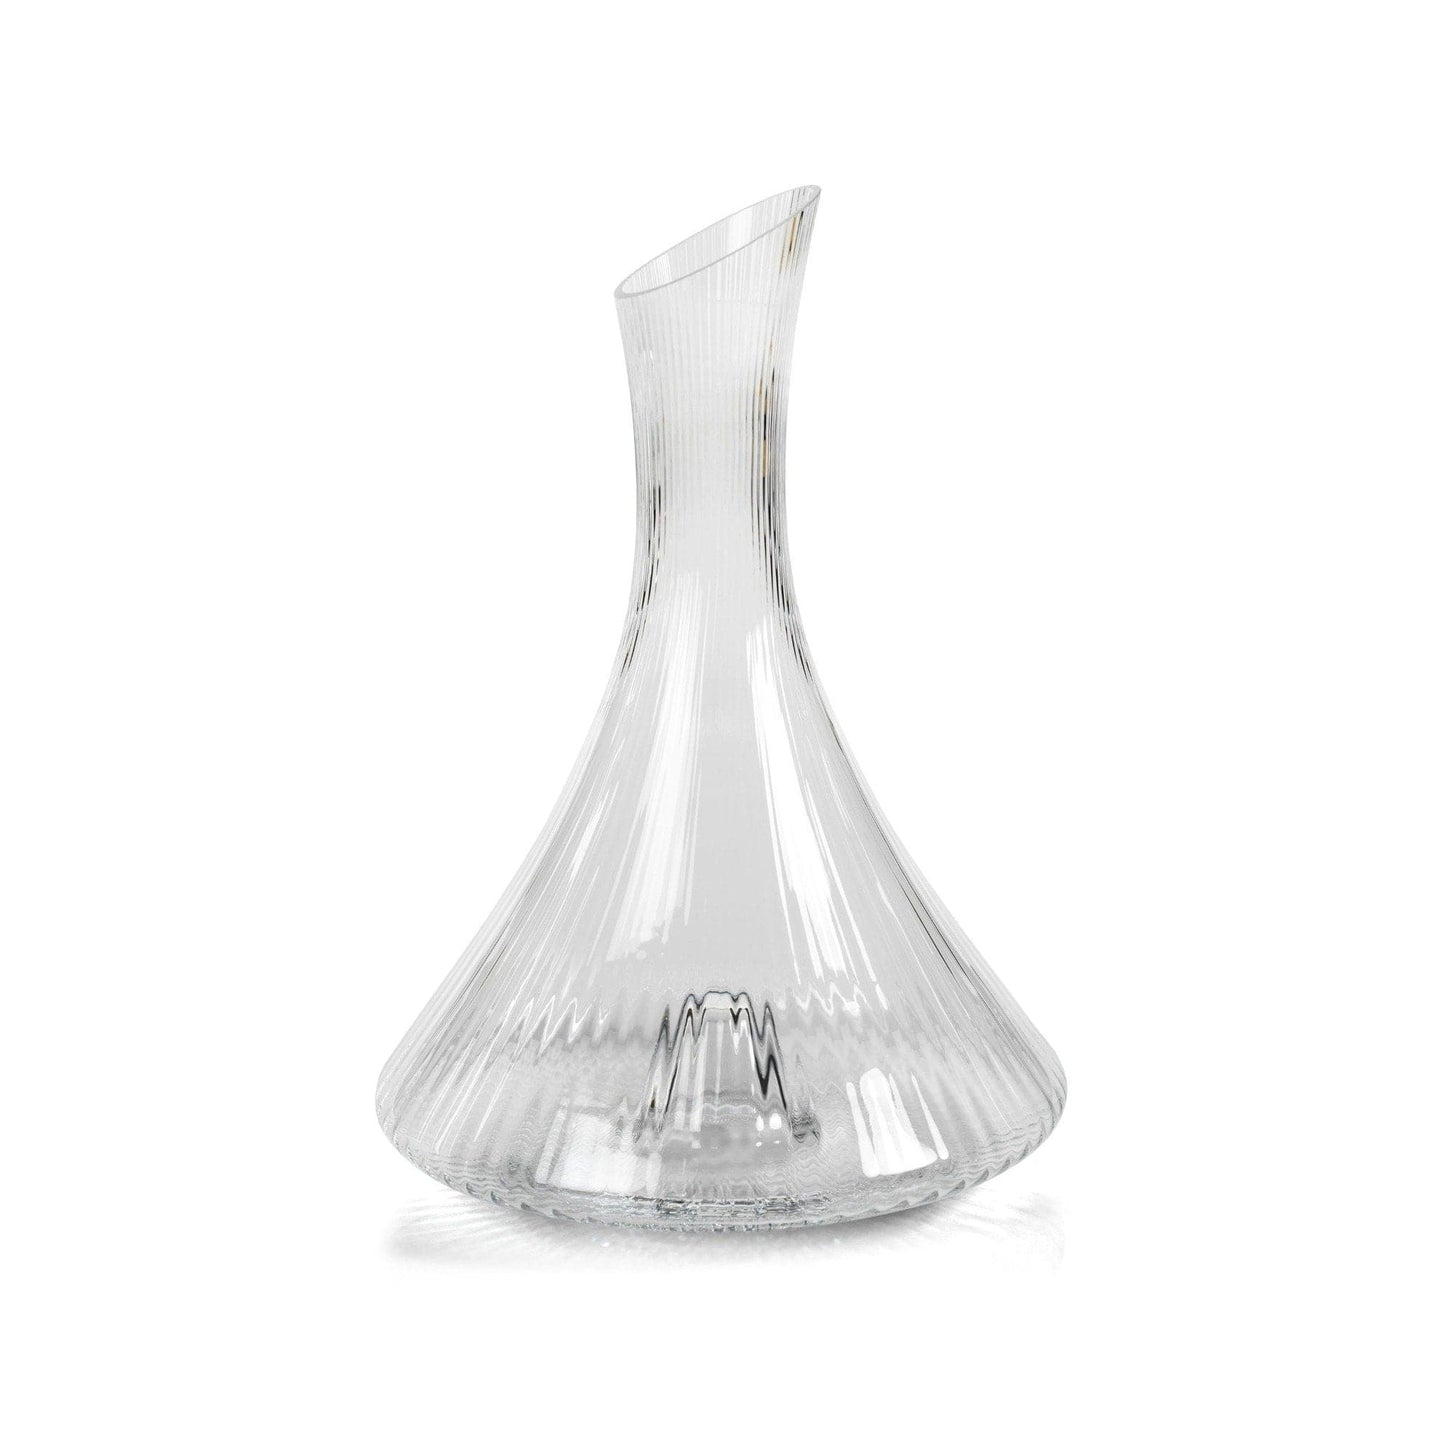 Zodax Bandol Fluted Decanter Party & Celebration ch-6021